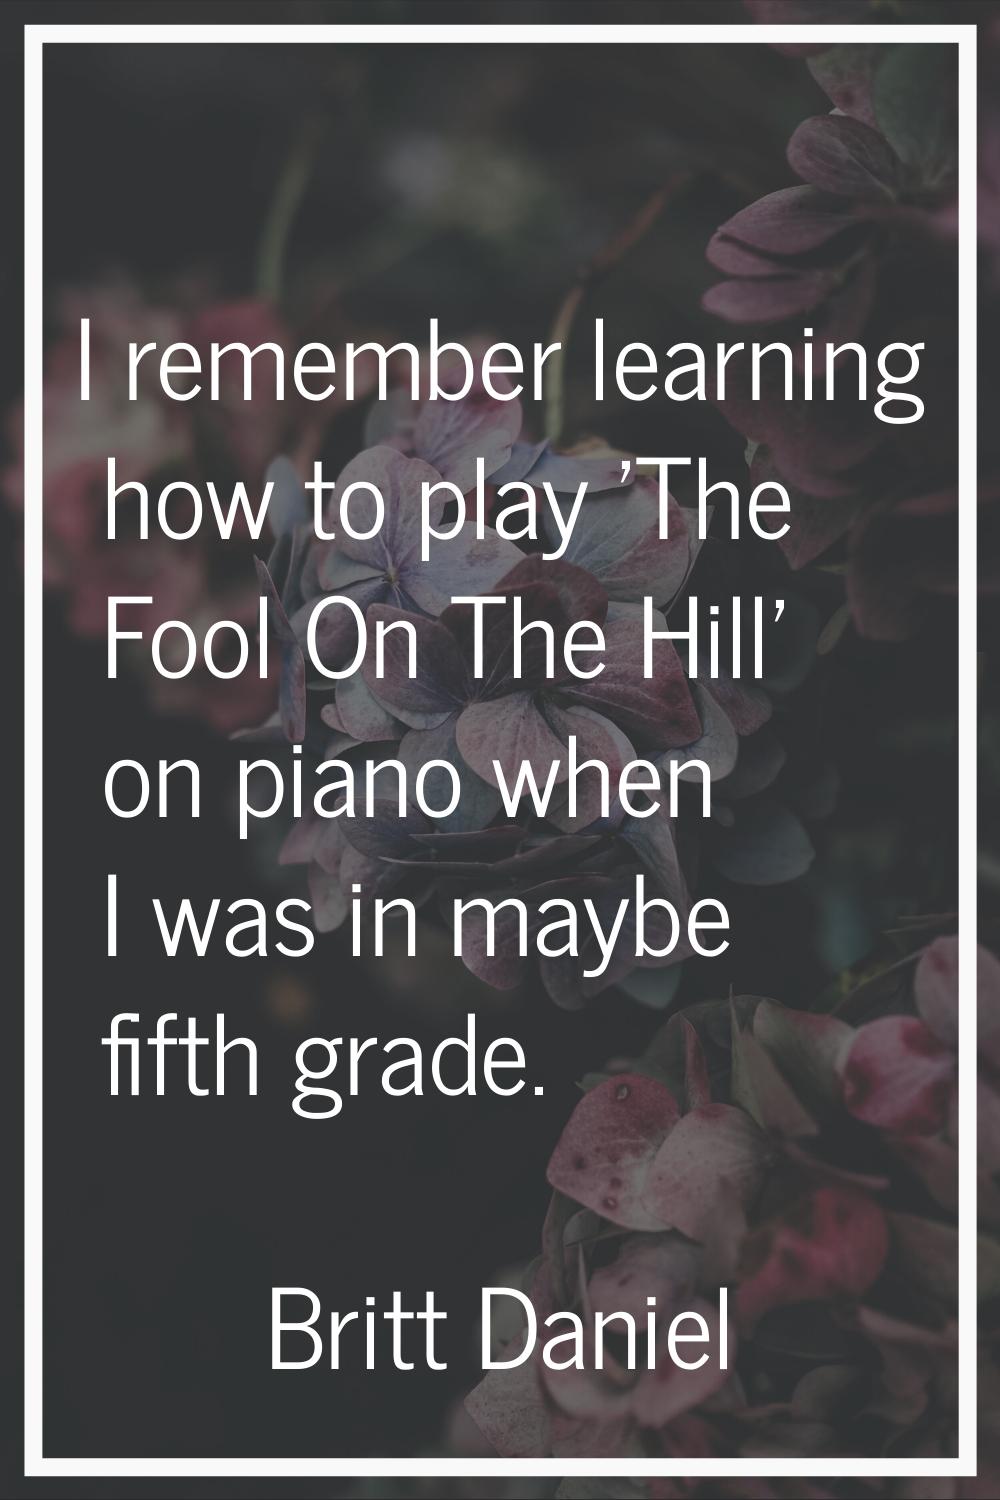 I remember learning how to play 'The Fool On The Hill' on piano when I was in maybe fifth grade.